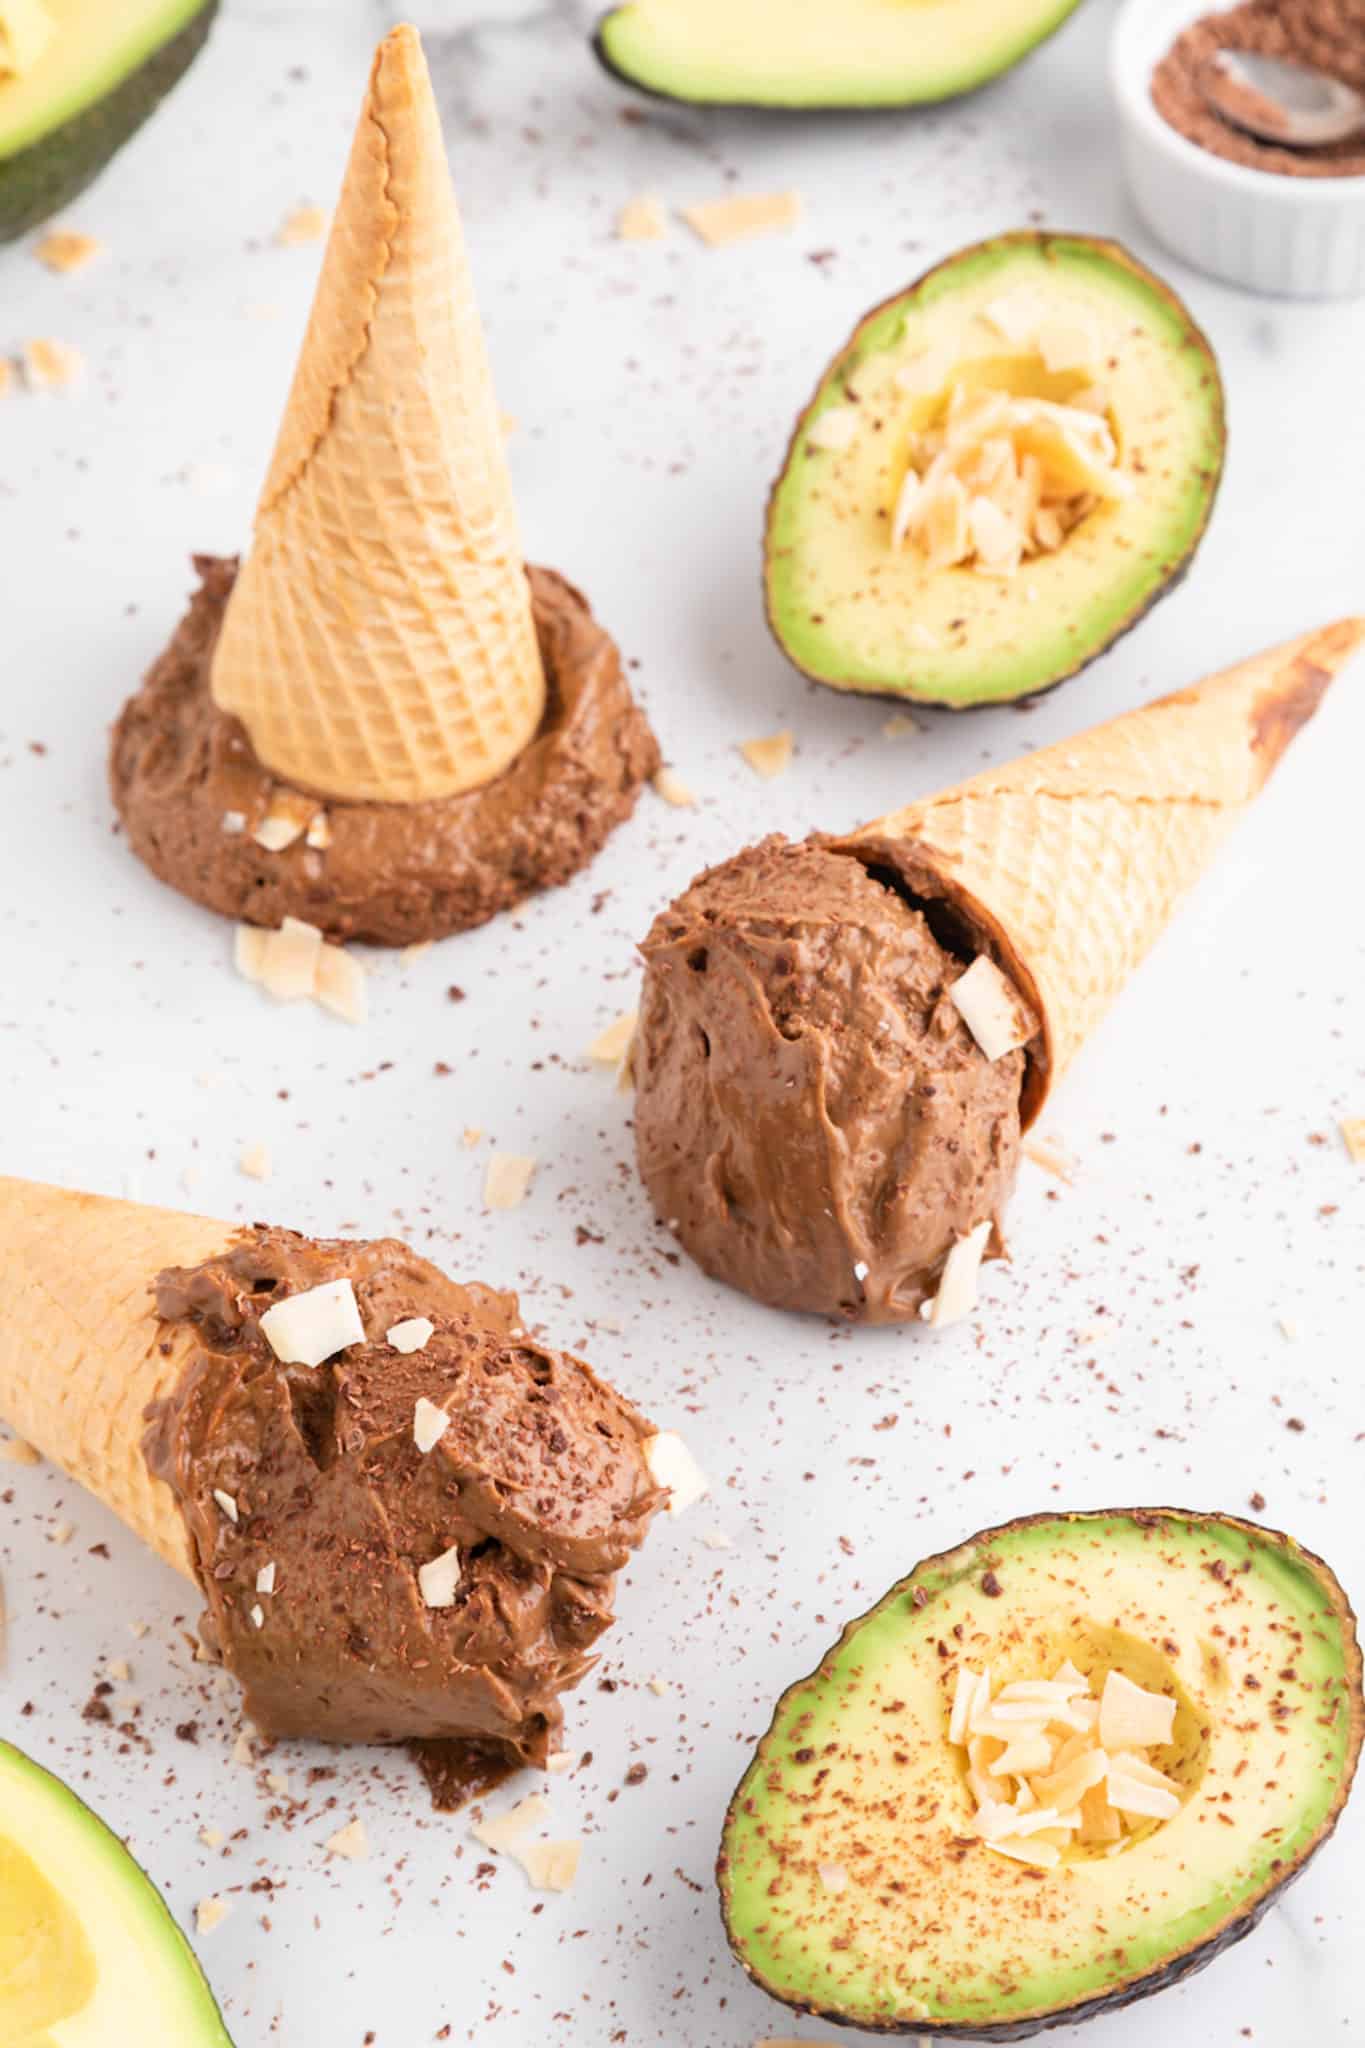 Three sugar cones on their sides filled with avocado chocolate ice cream.